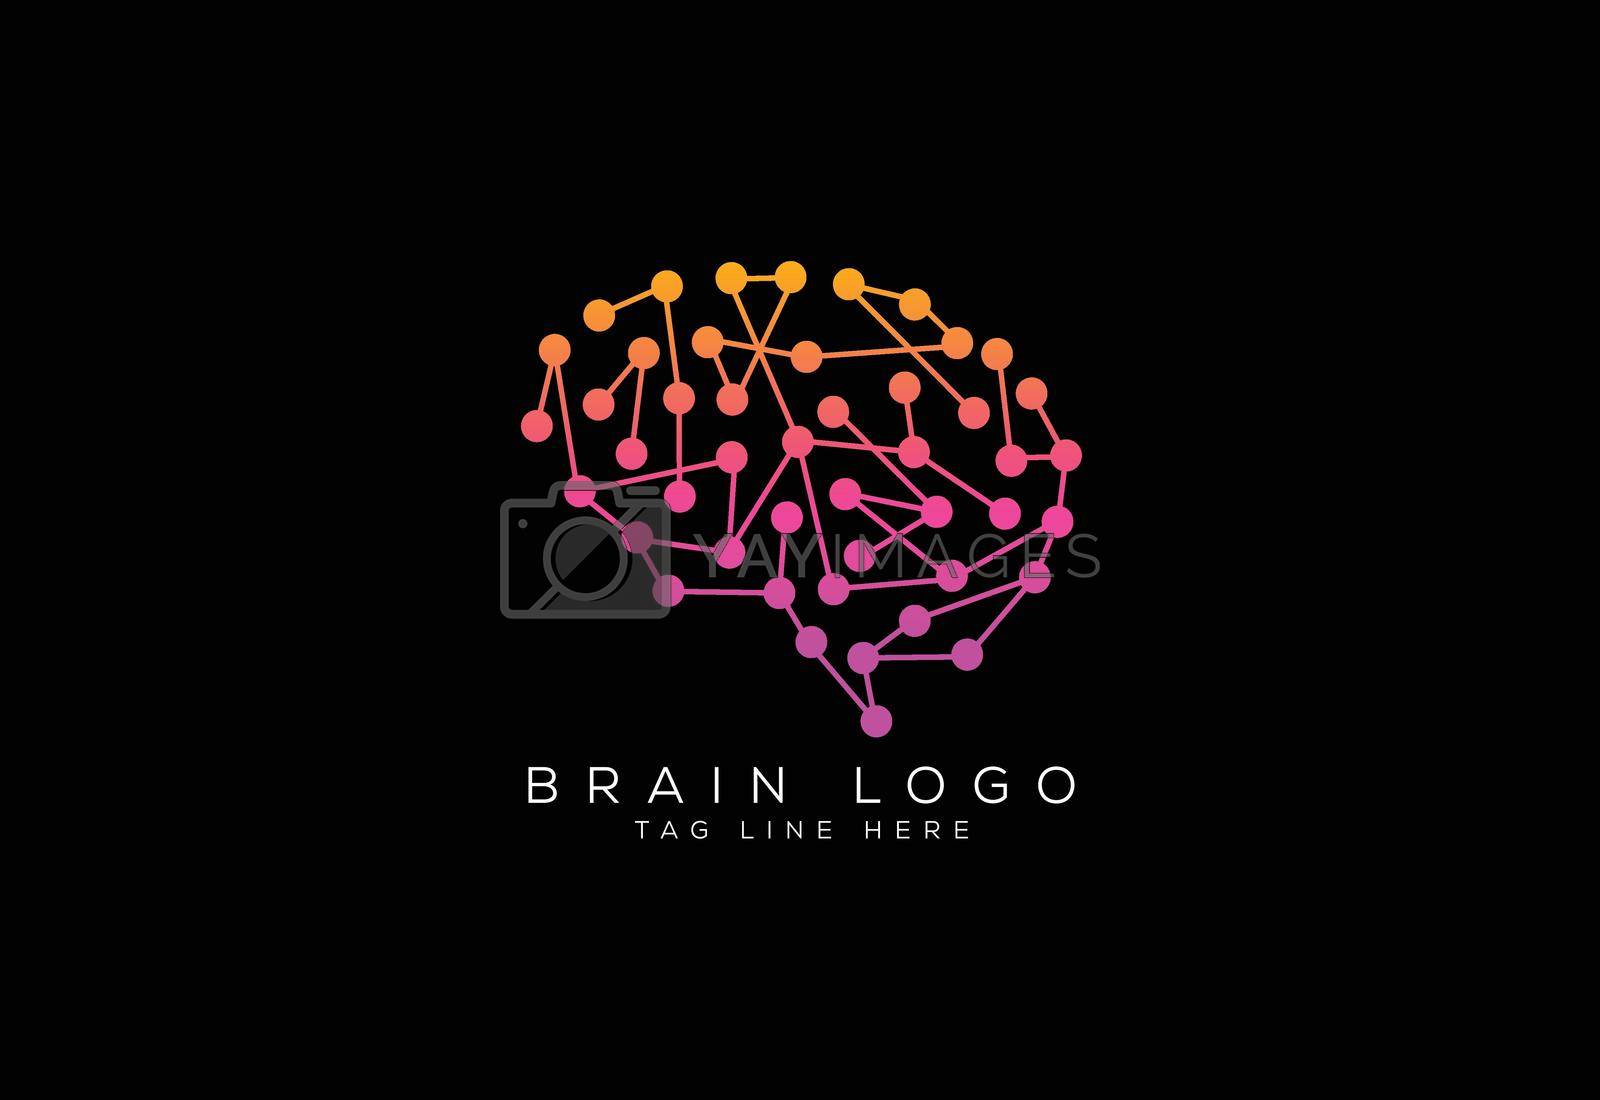 Royalty free image of Modern and simple logo design for a brain, Brain logo icon sign symbol. by busrat